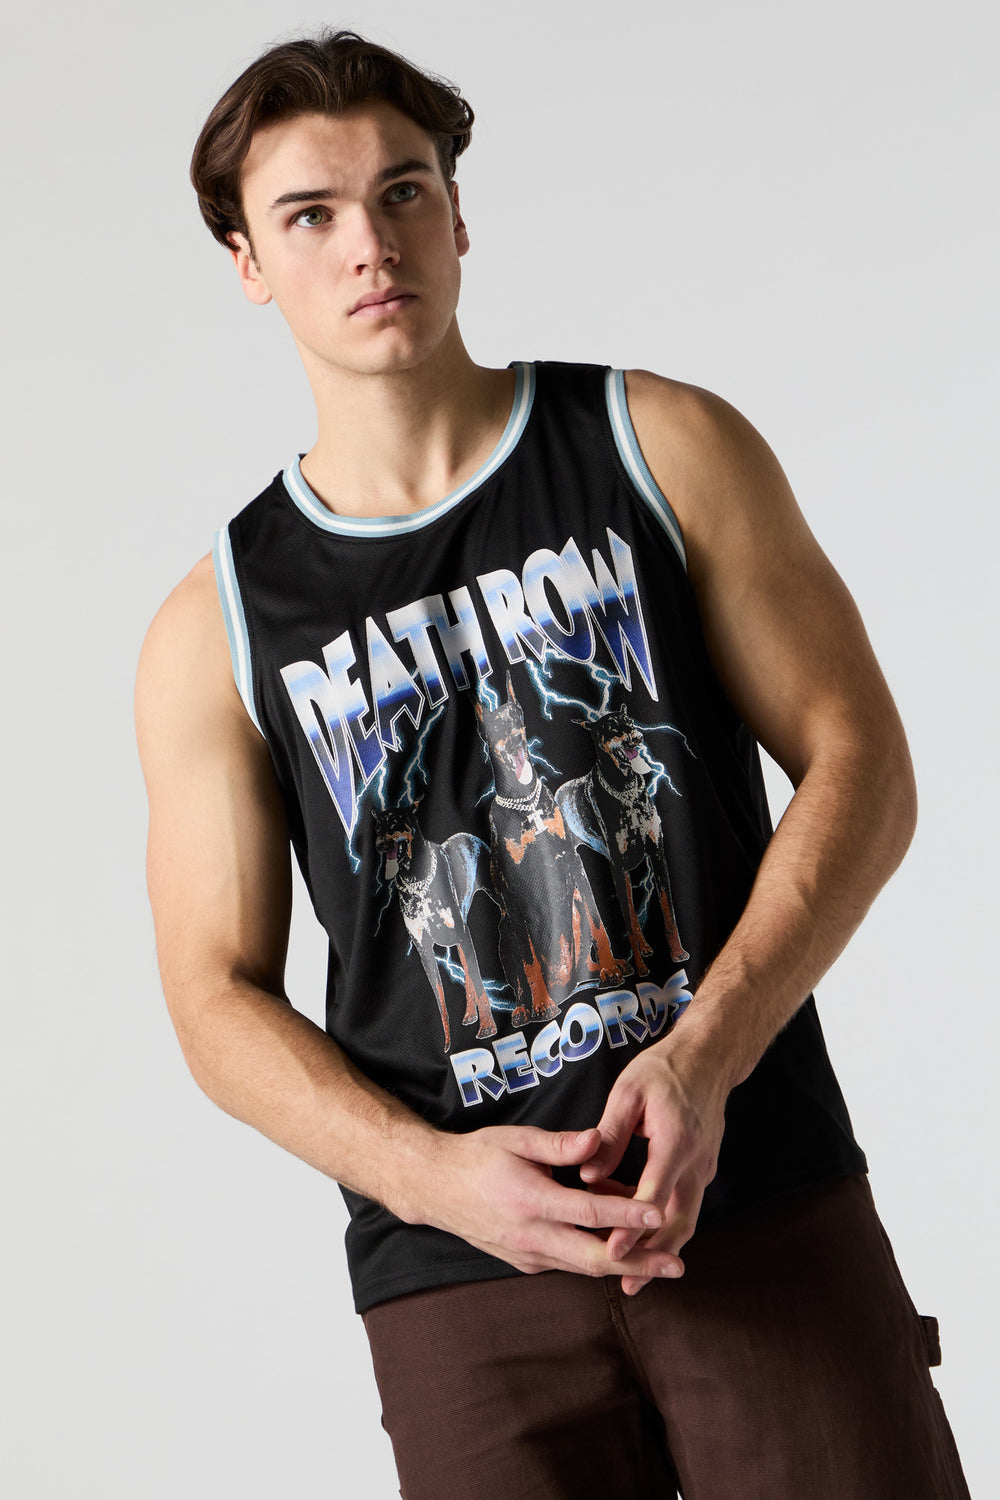 Death Row Records Graphic Basketball Jersey Death Row Records Graphic Basketball Jersey 1